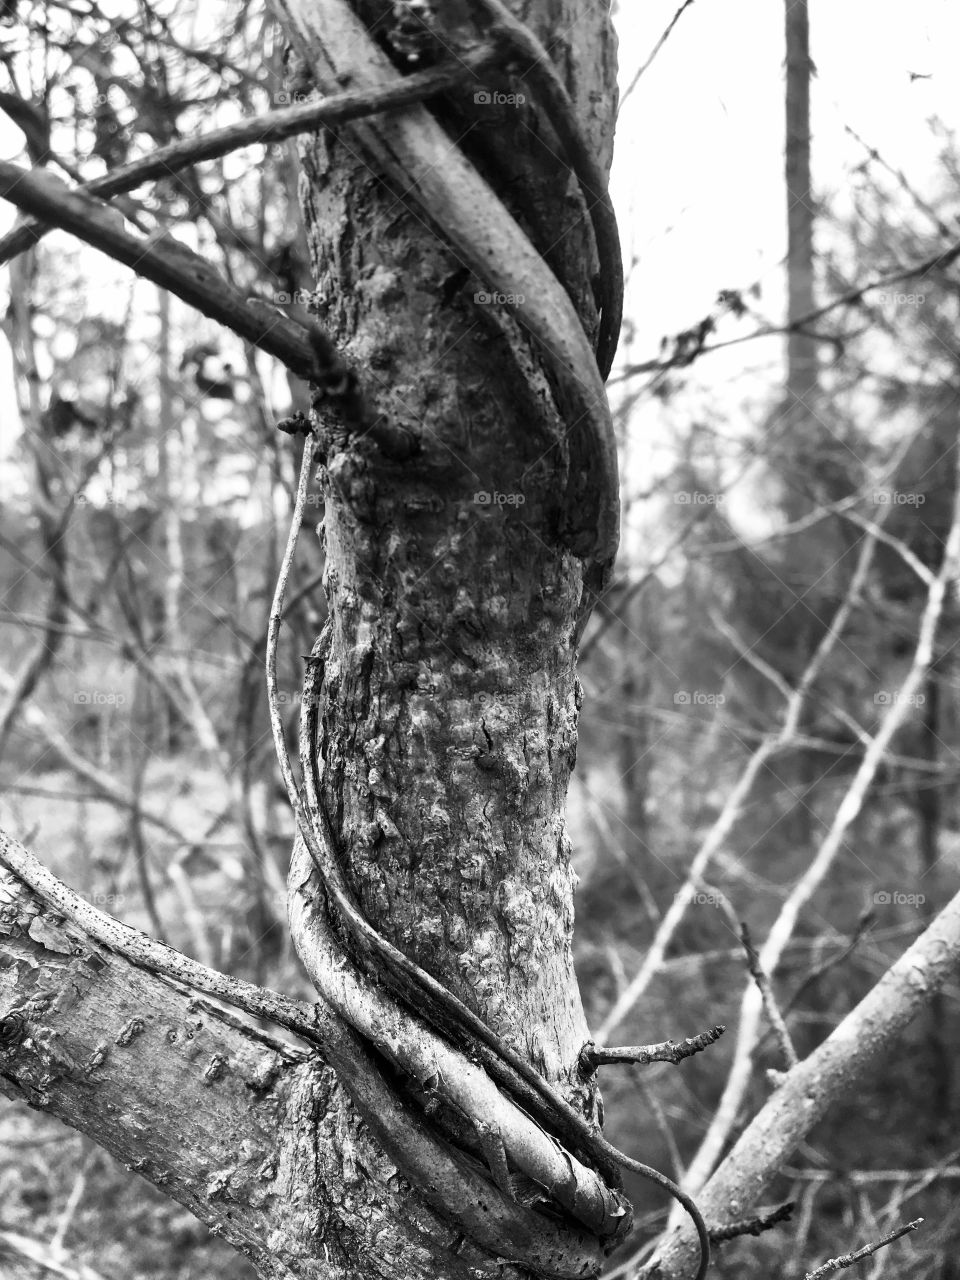 Black and white image of a tree wrapped by vines